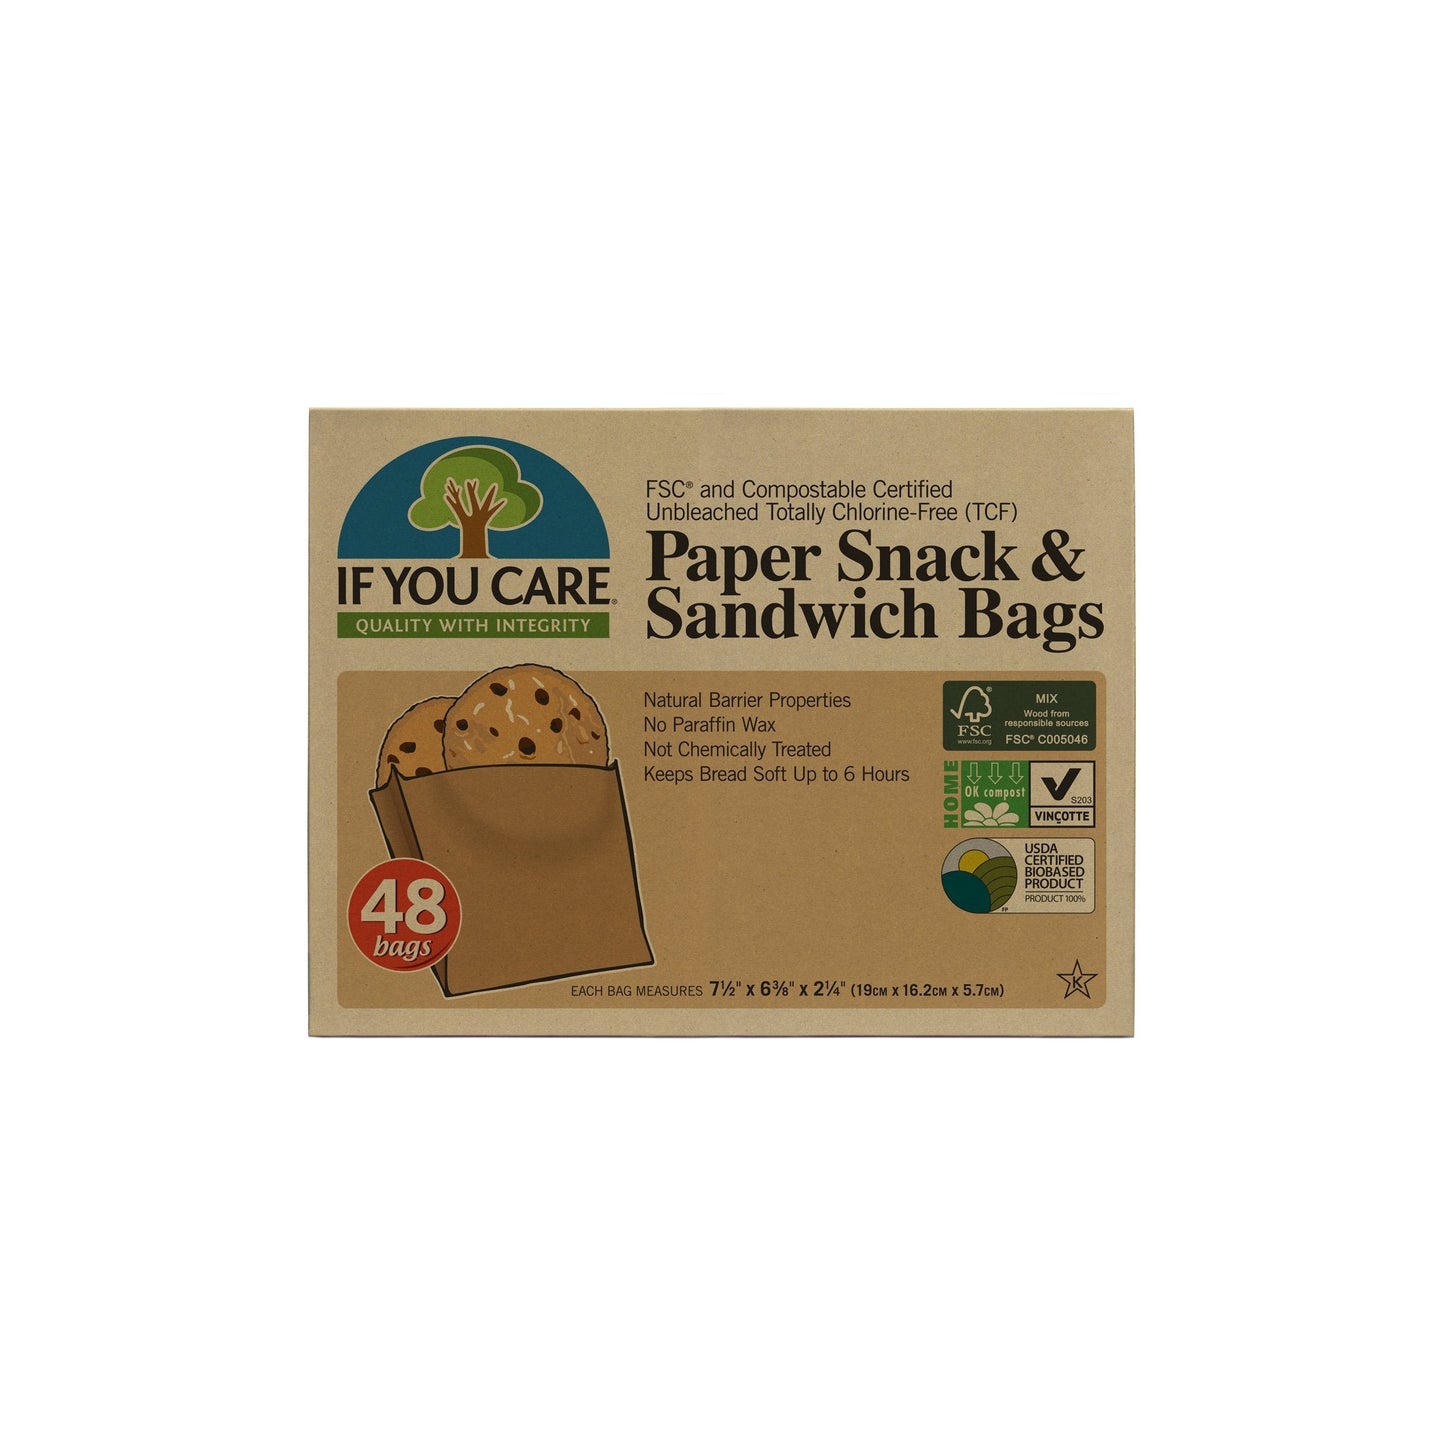 If You Care Sandwich Bags 48 bags - Just Natural